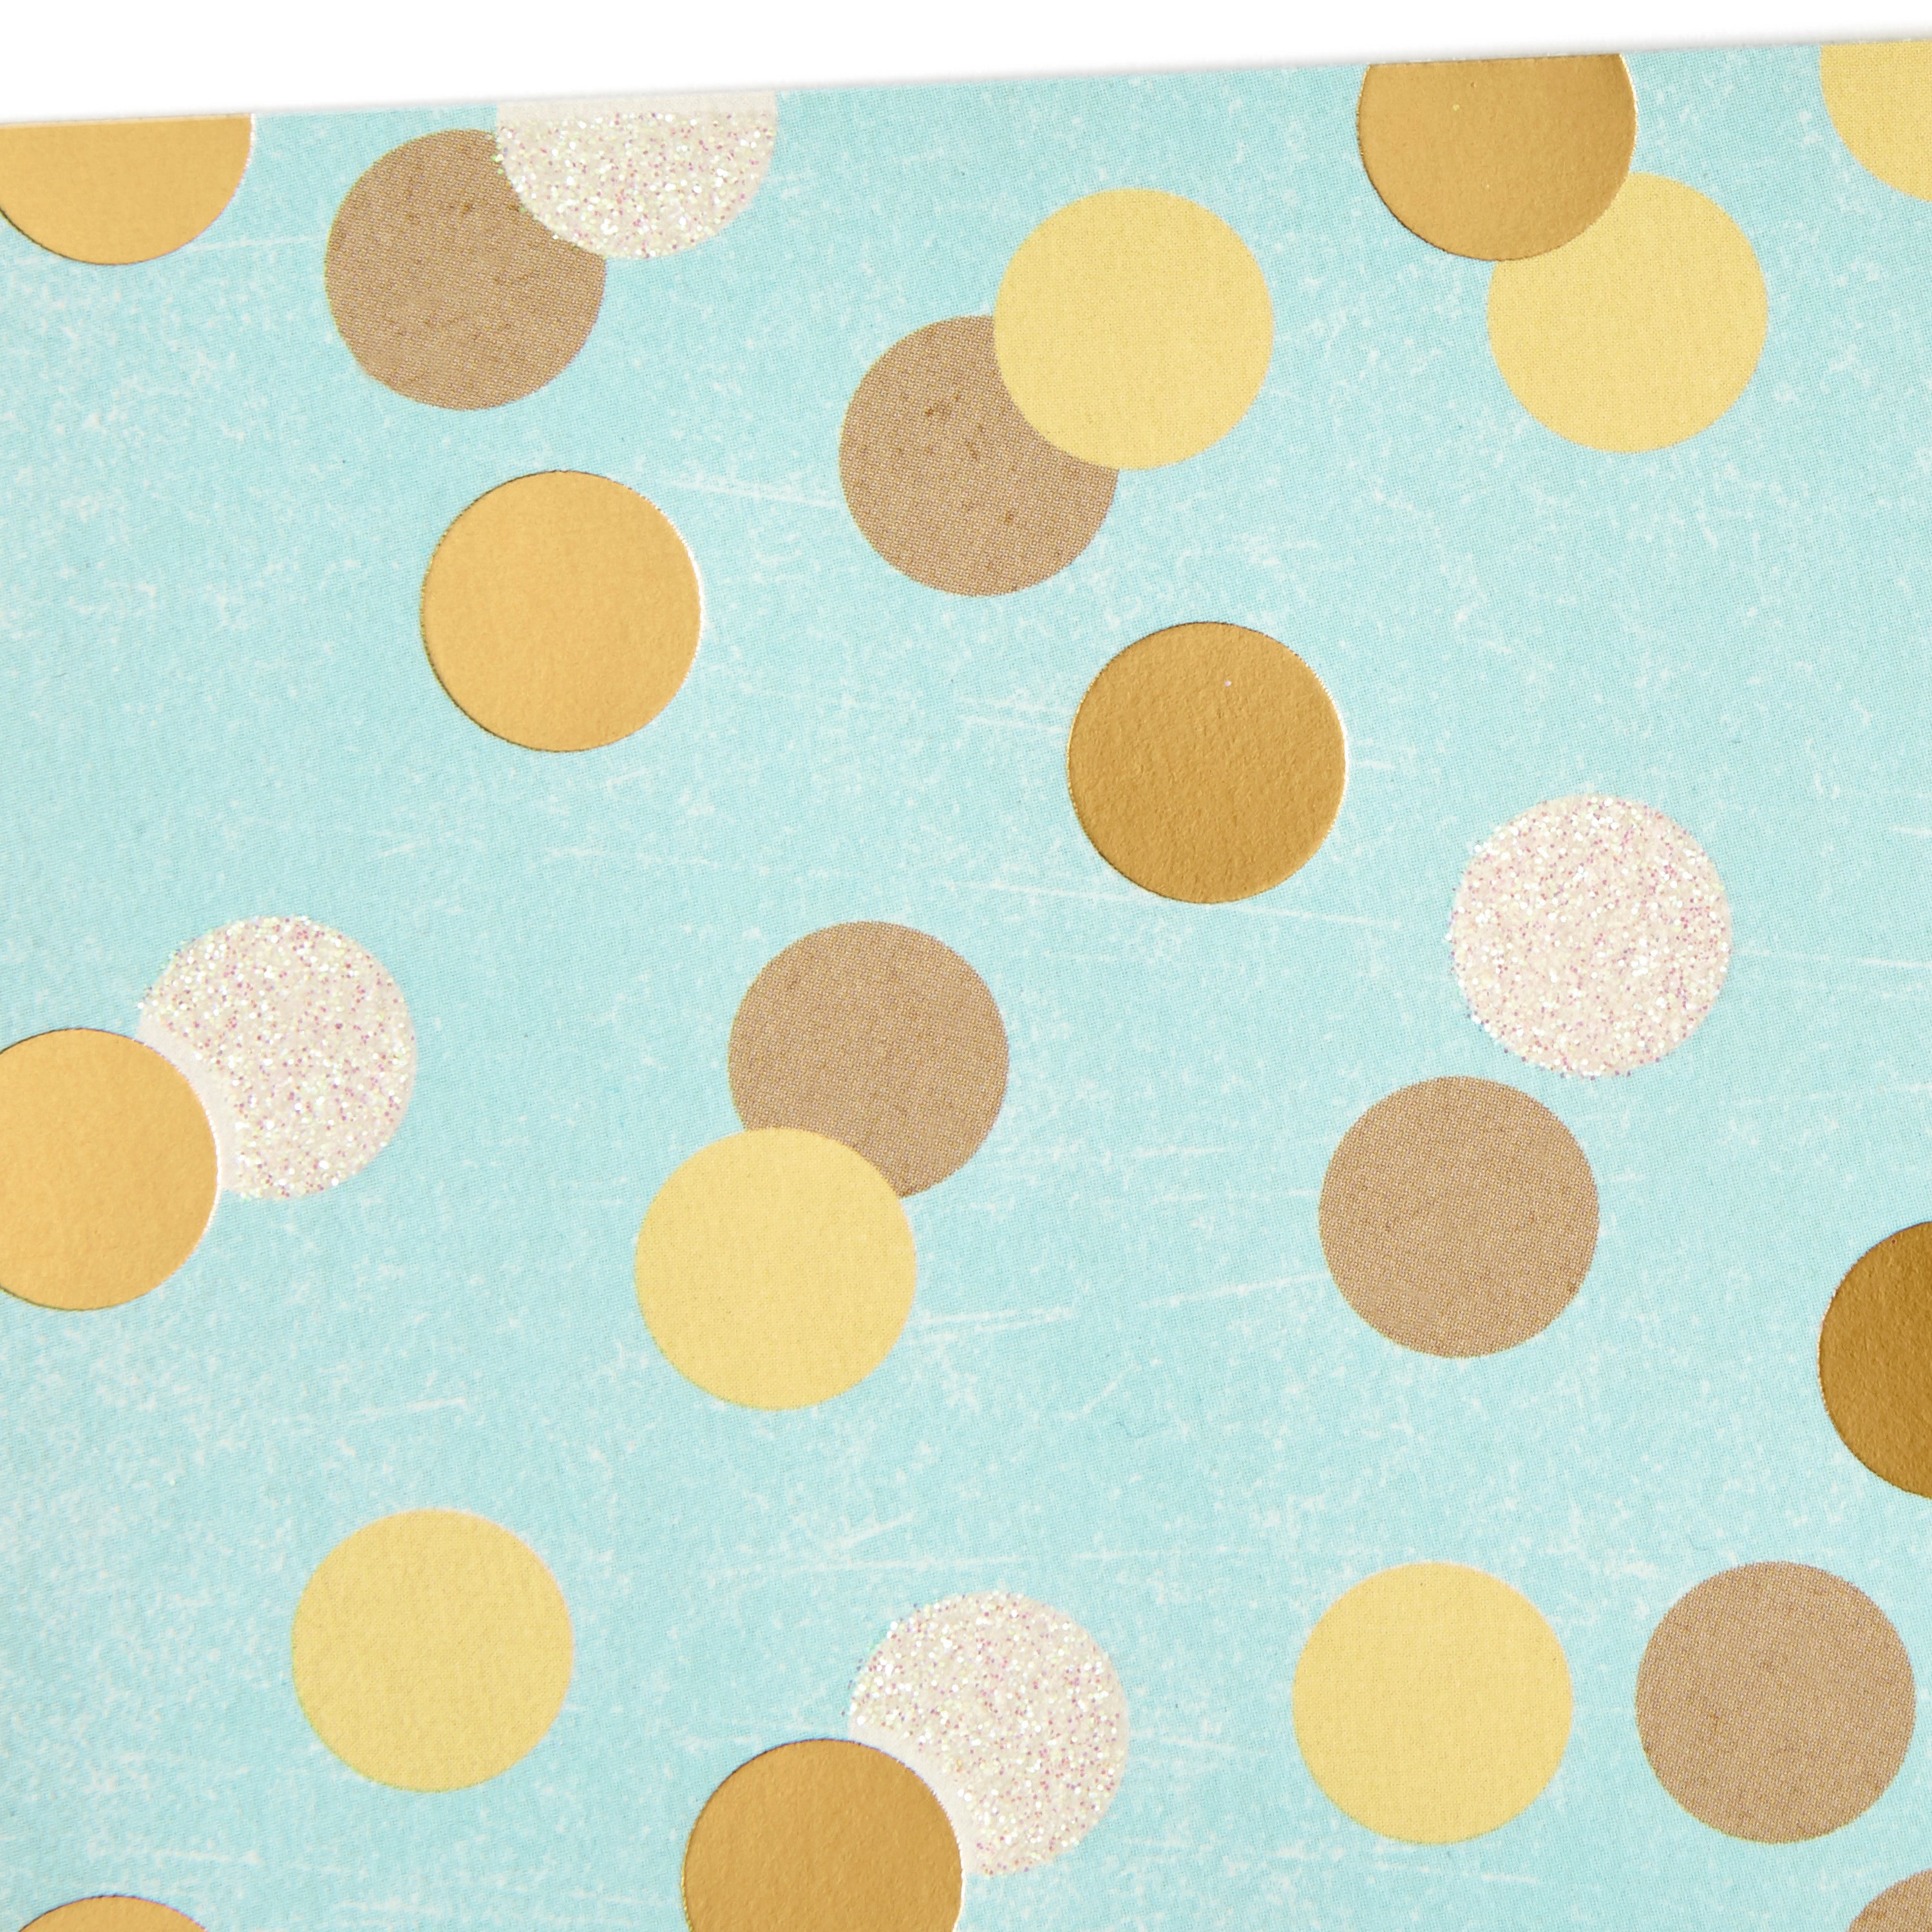 Blank Note Cards (Flowers and Dots, 50 Blank Cards or Thank You Cards with Envelopes)